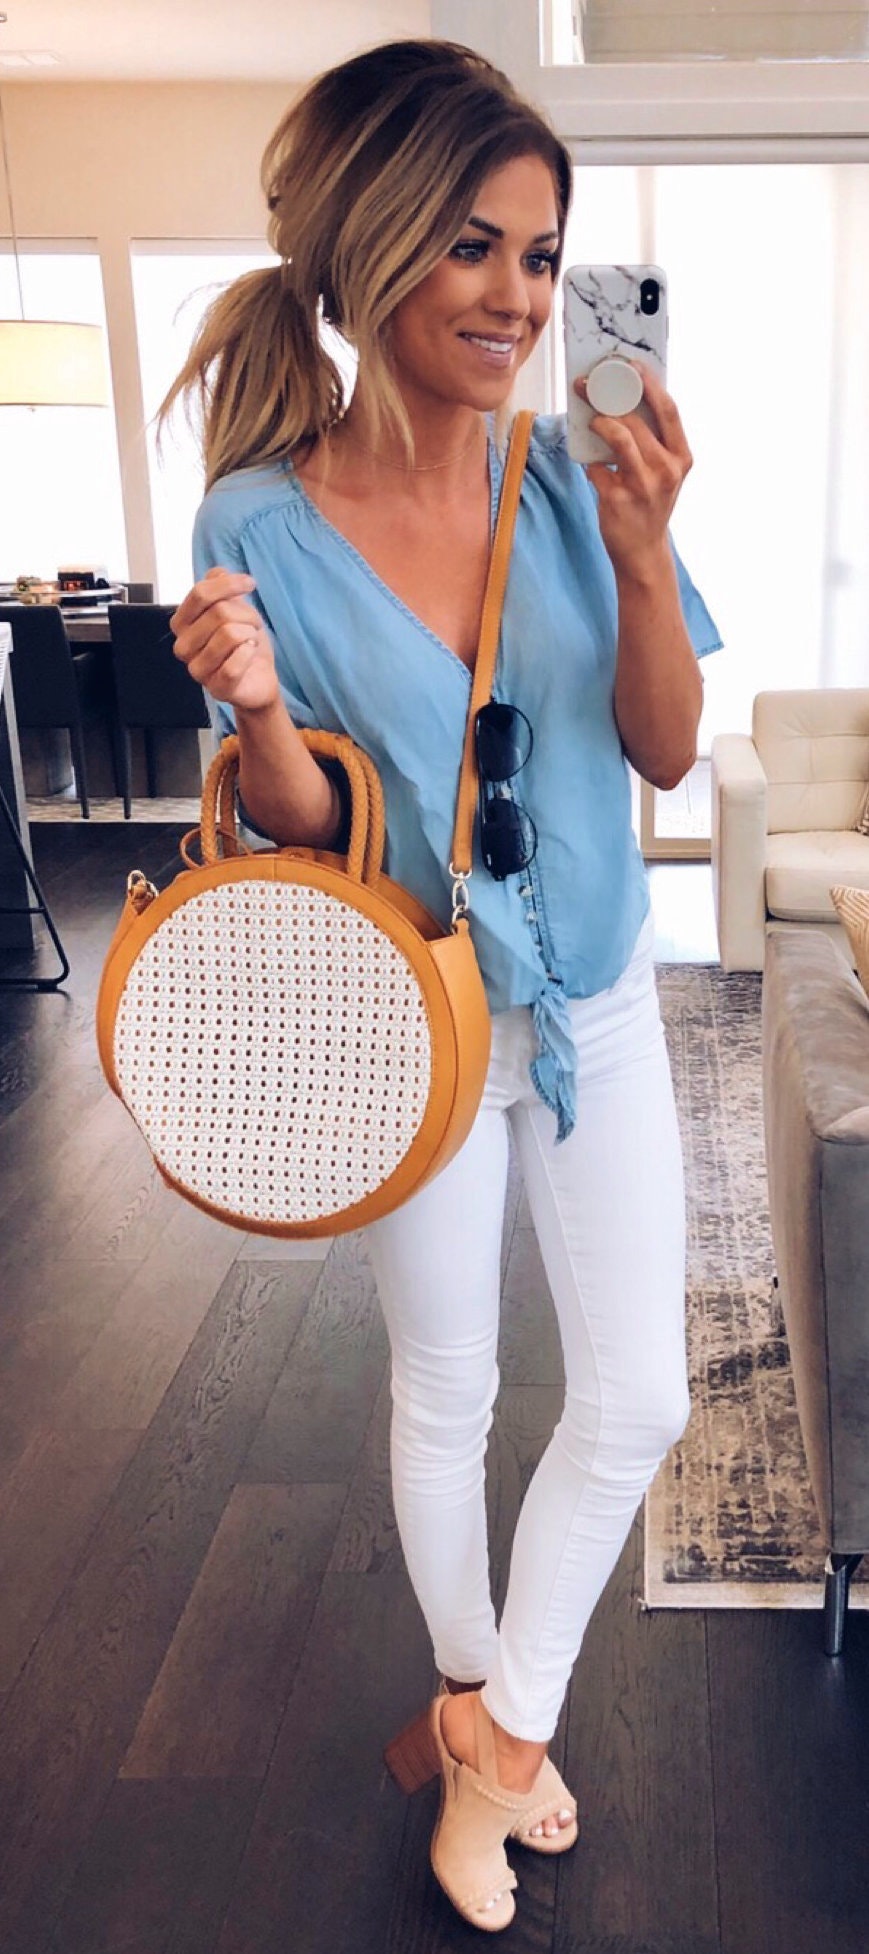 White fitted jeans, blue V-neck shirt and round crossbody bag.